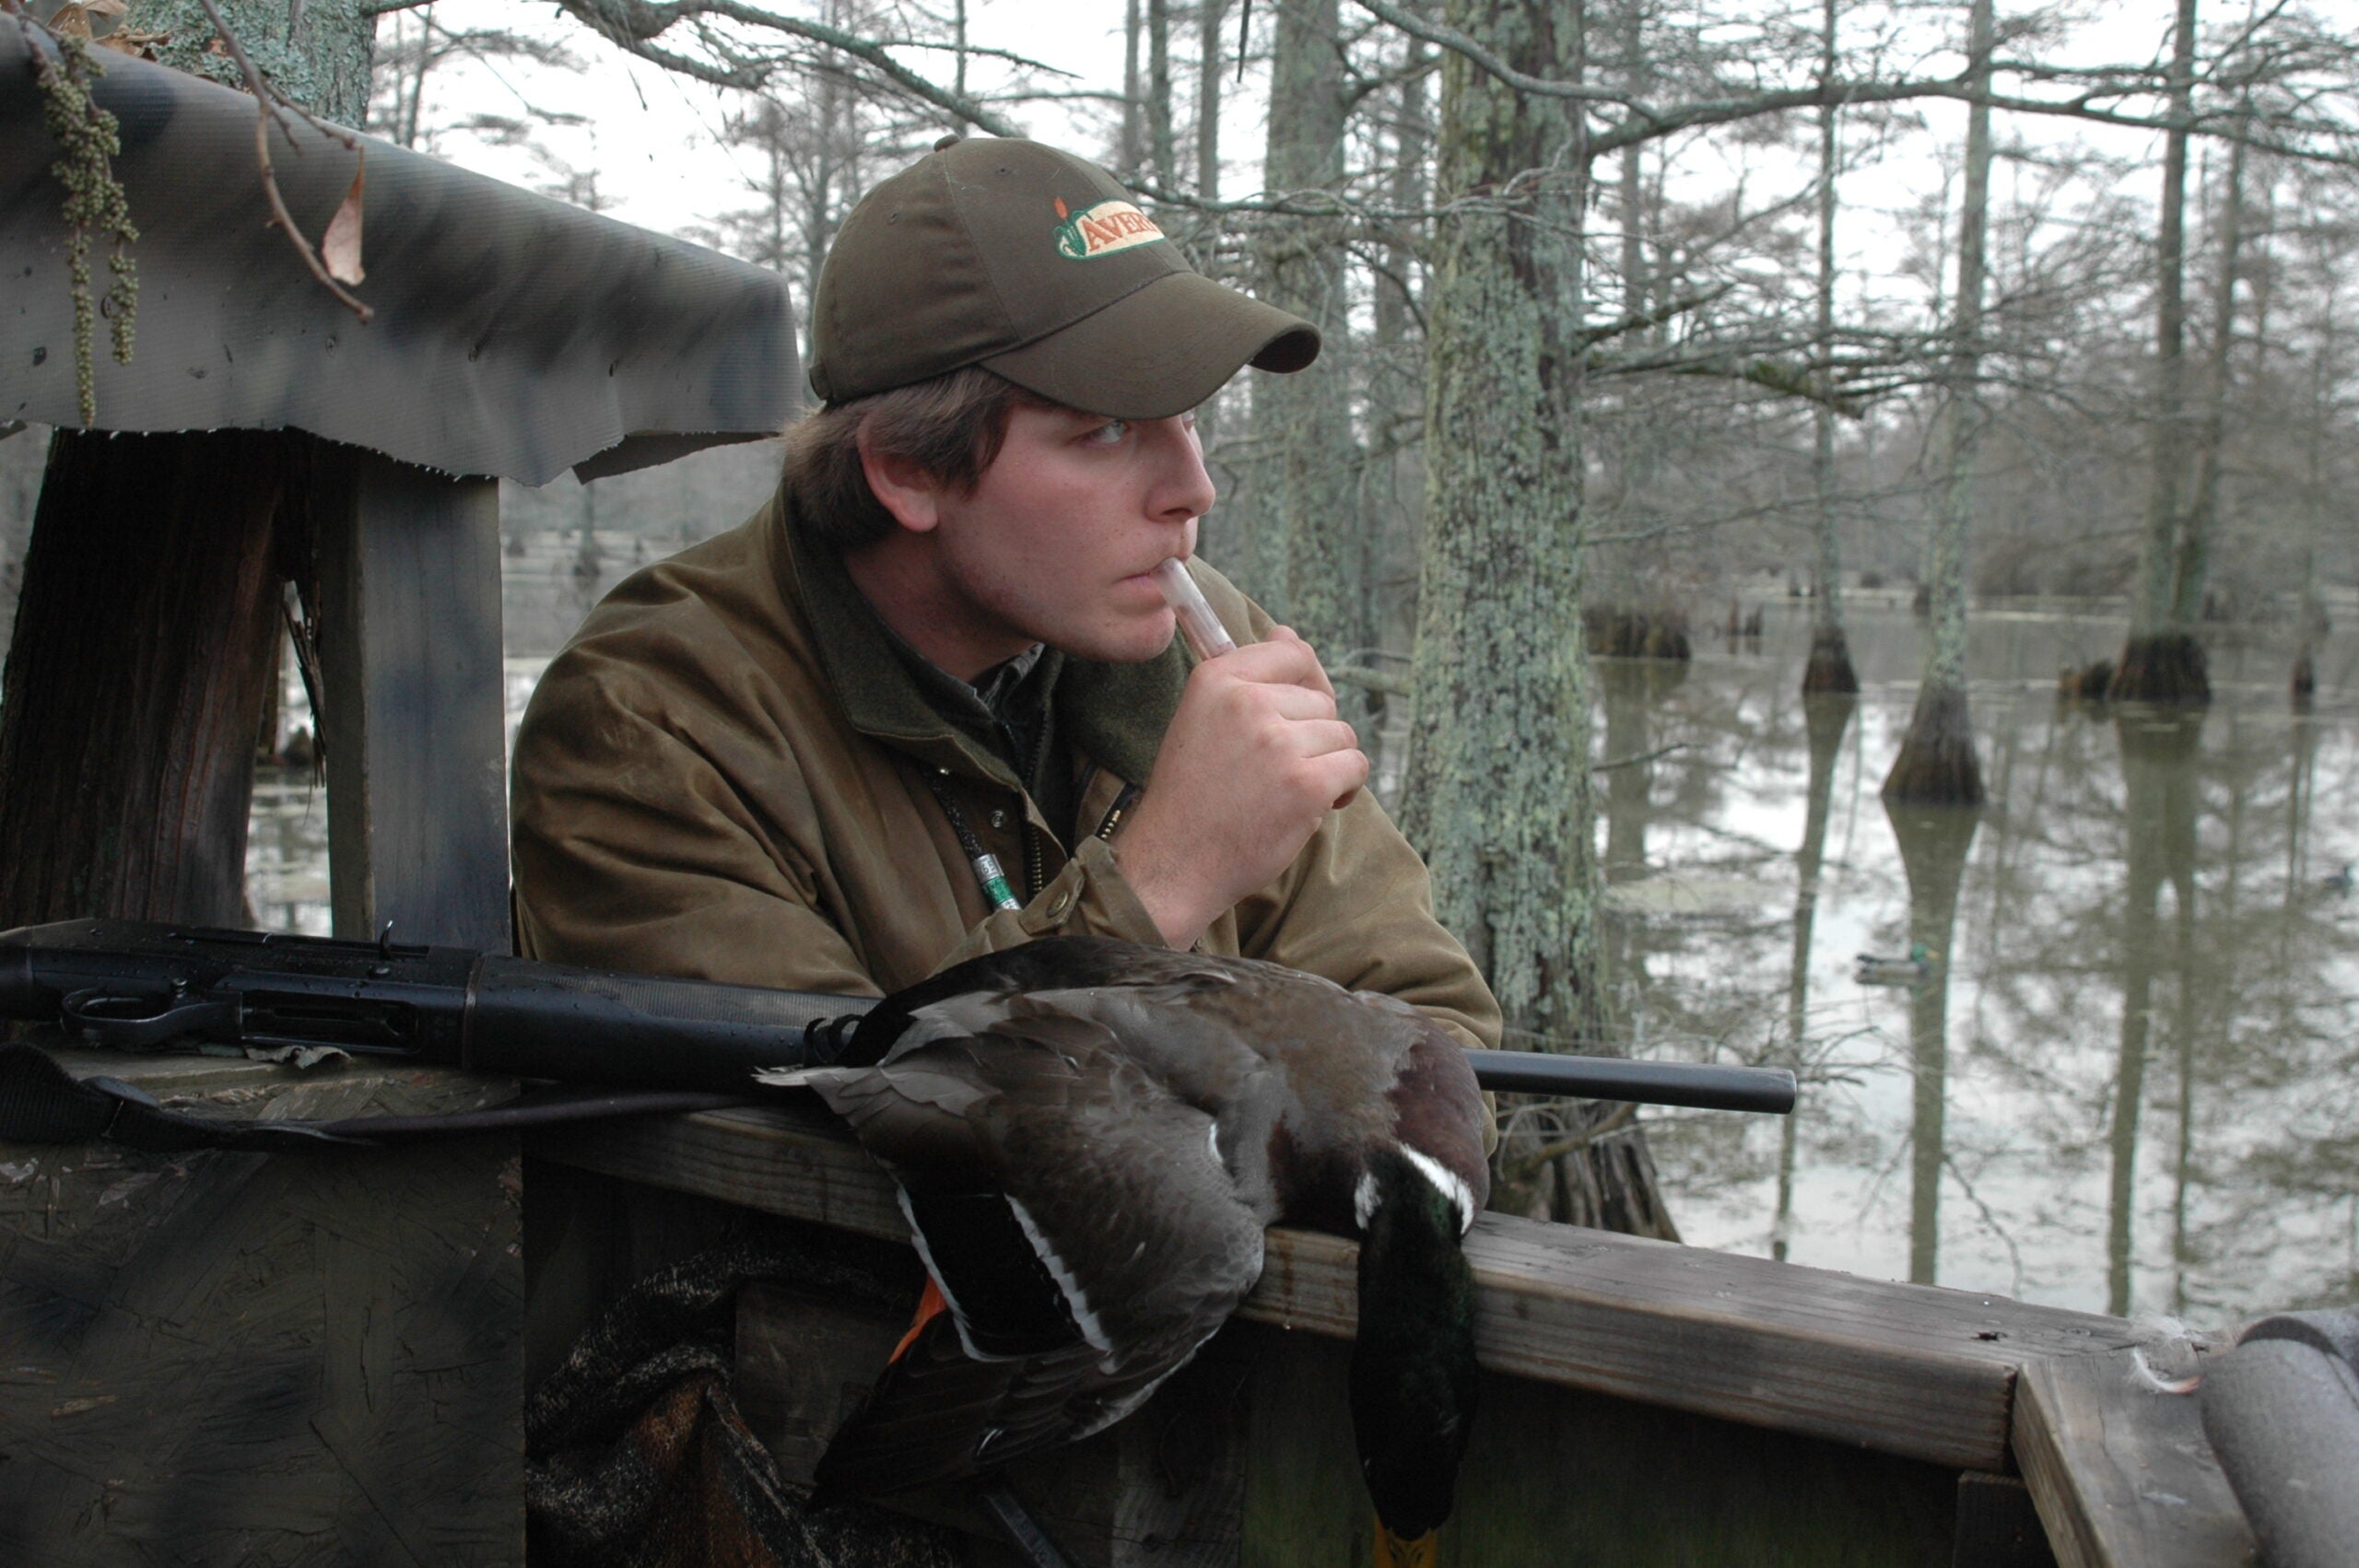 A man calls on a duck decoy while standing next to a boat.